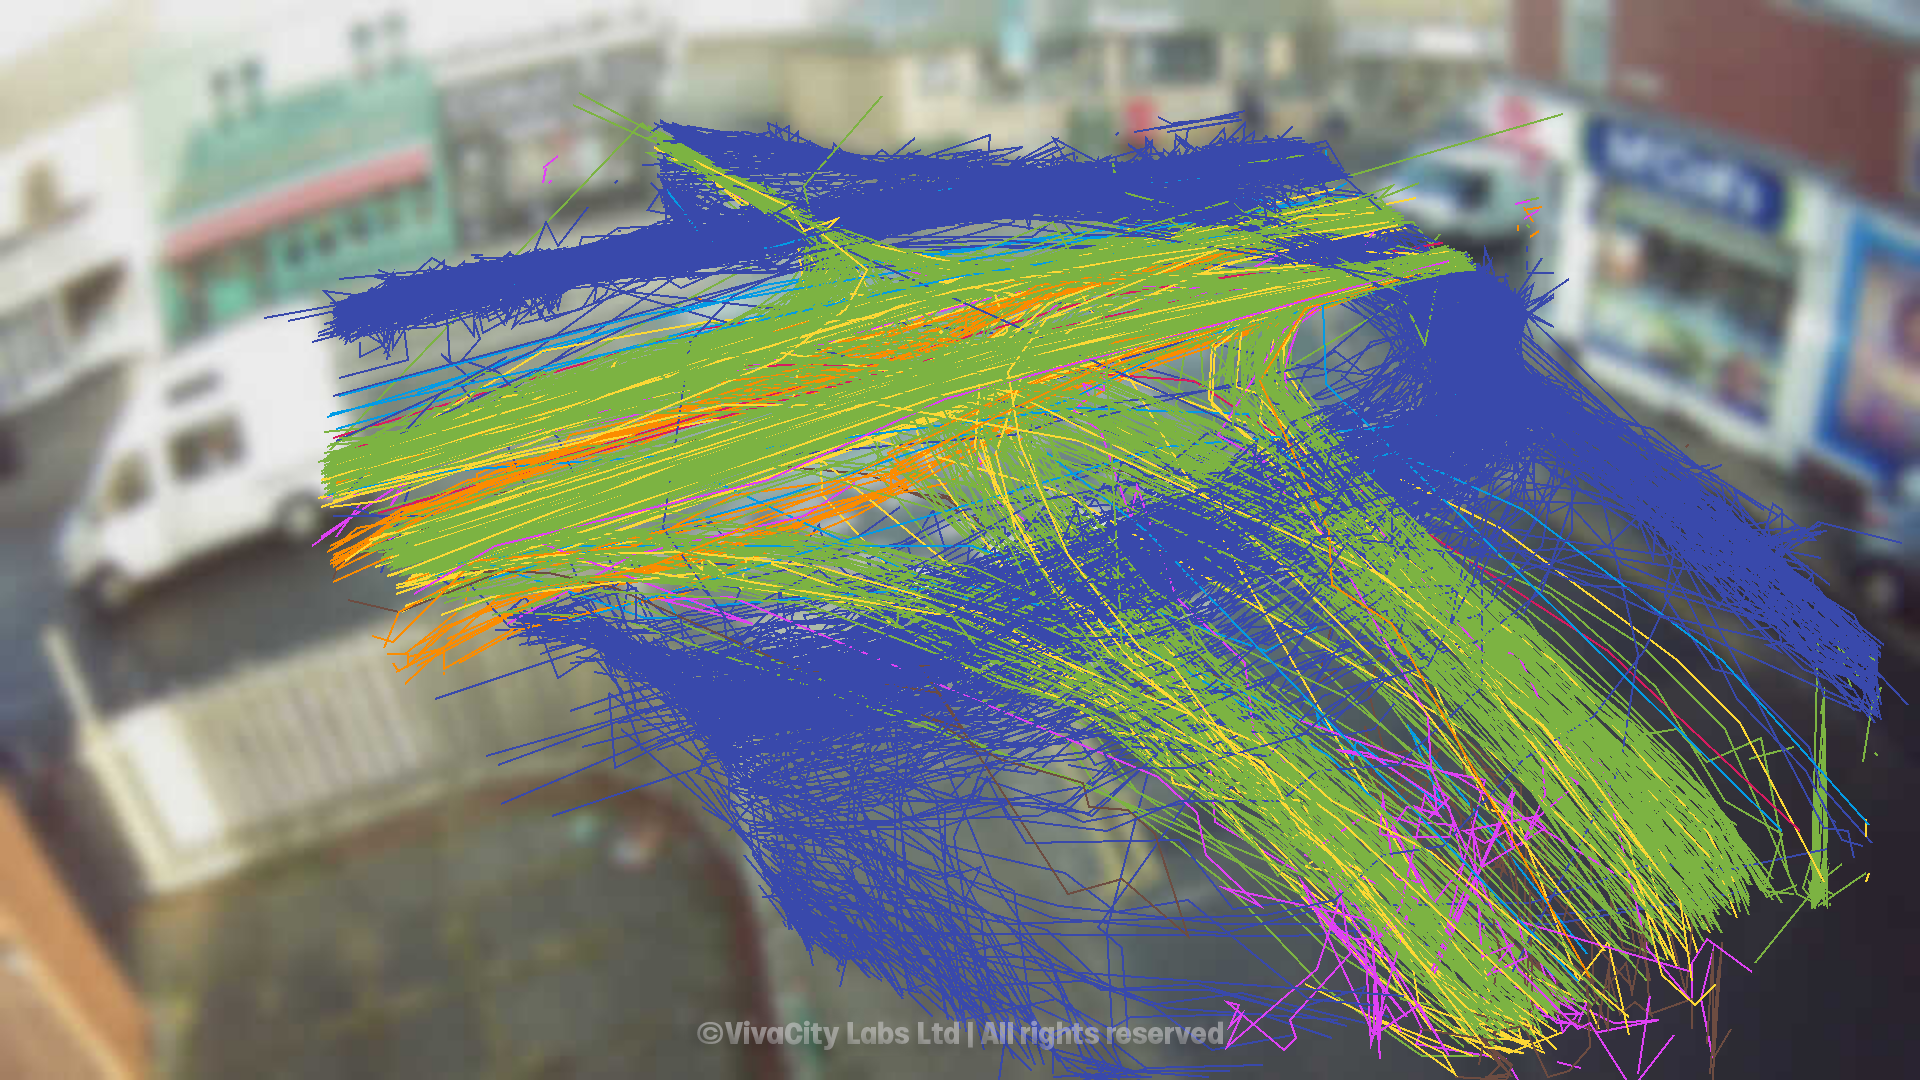 Image shows movement path data captured by VivaCity sensor at trial side zebra crossing in Cardiff.